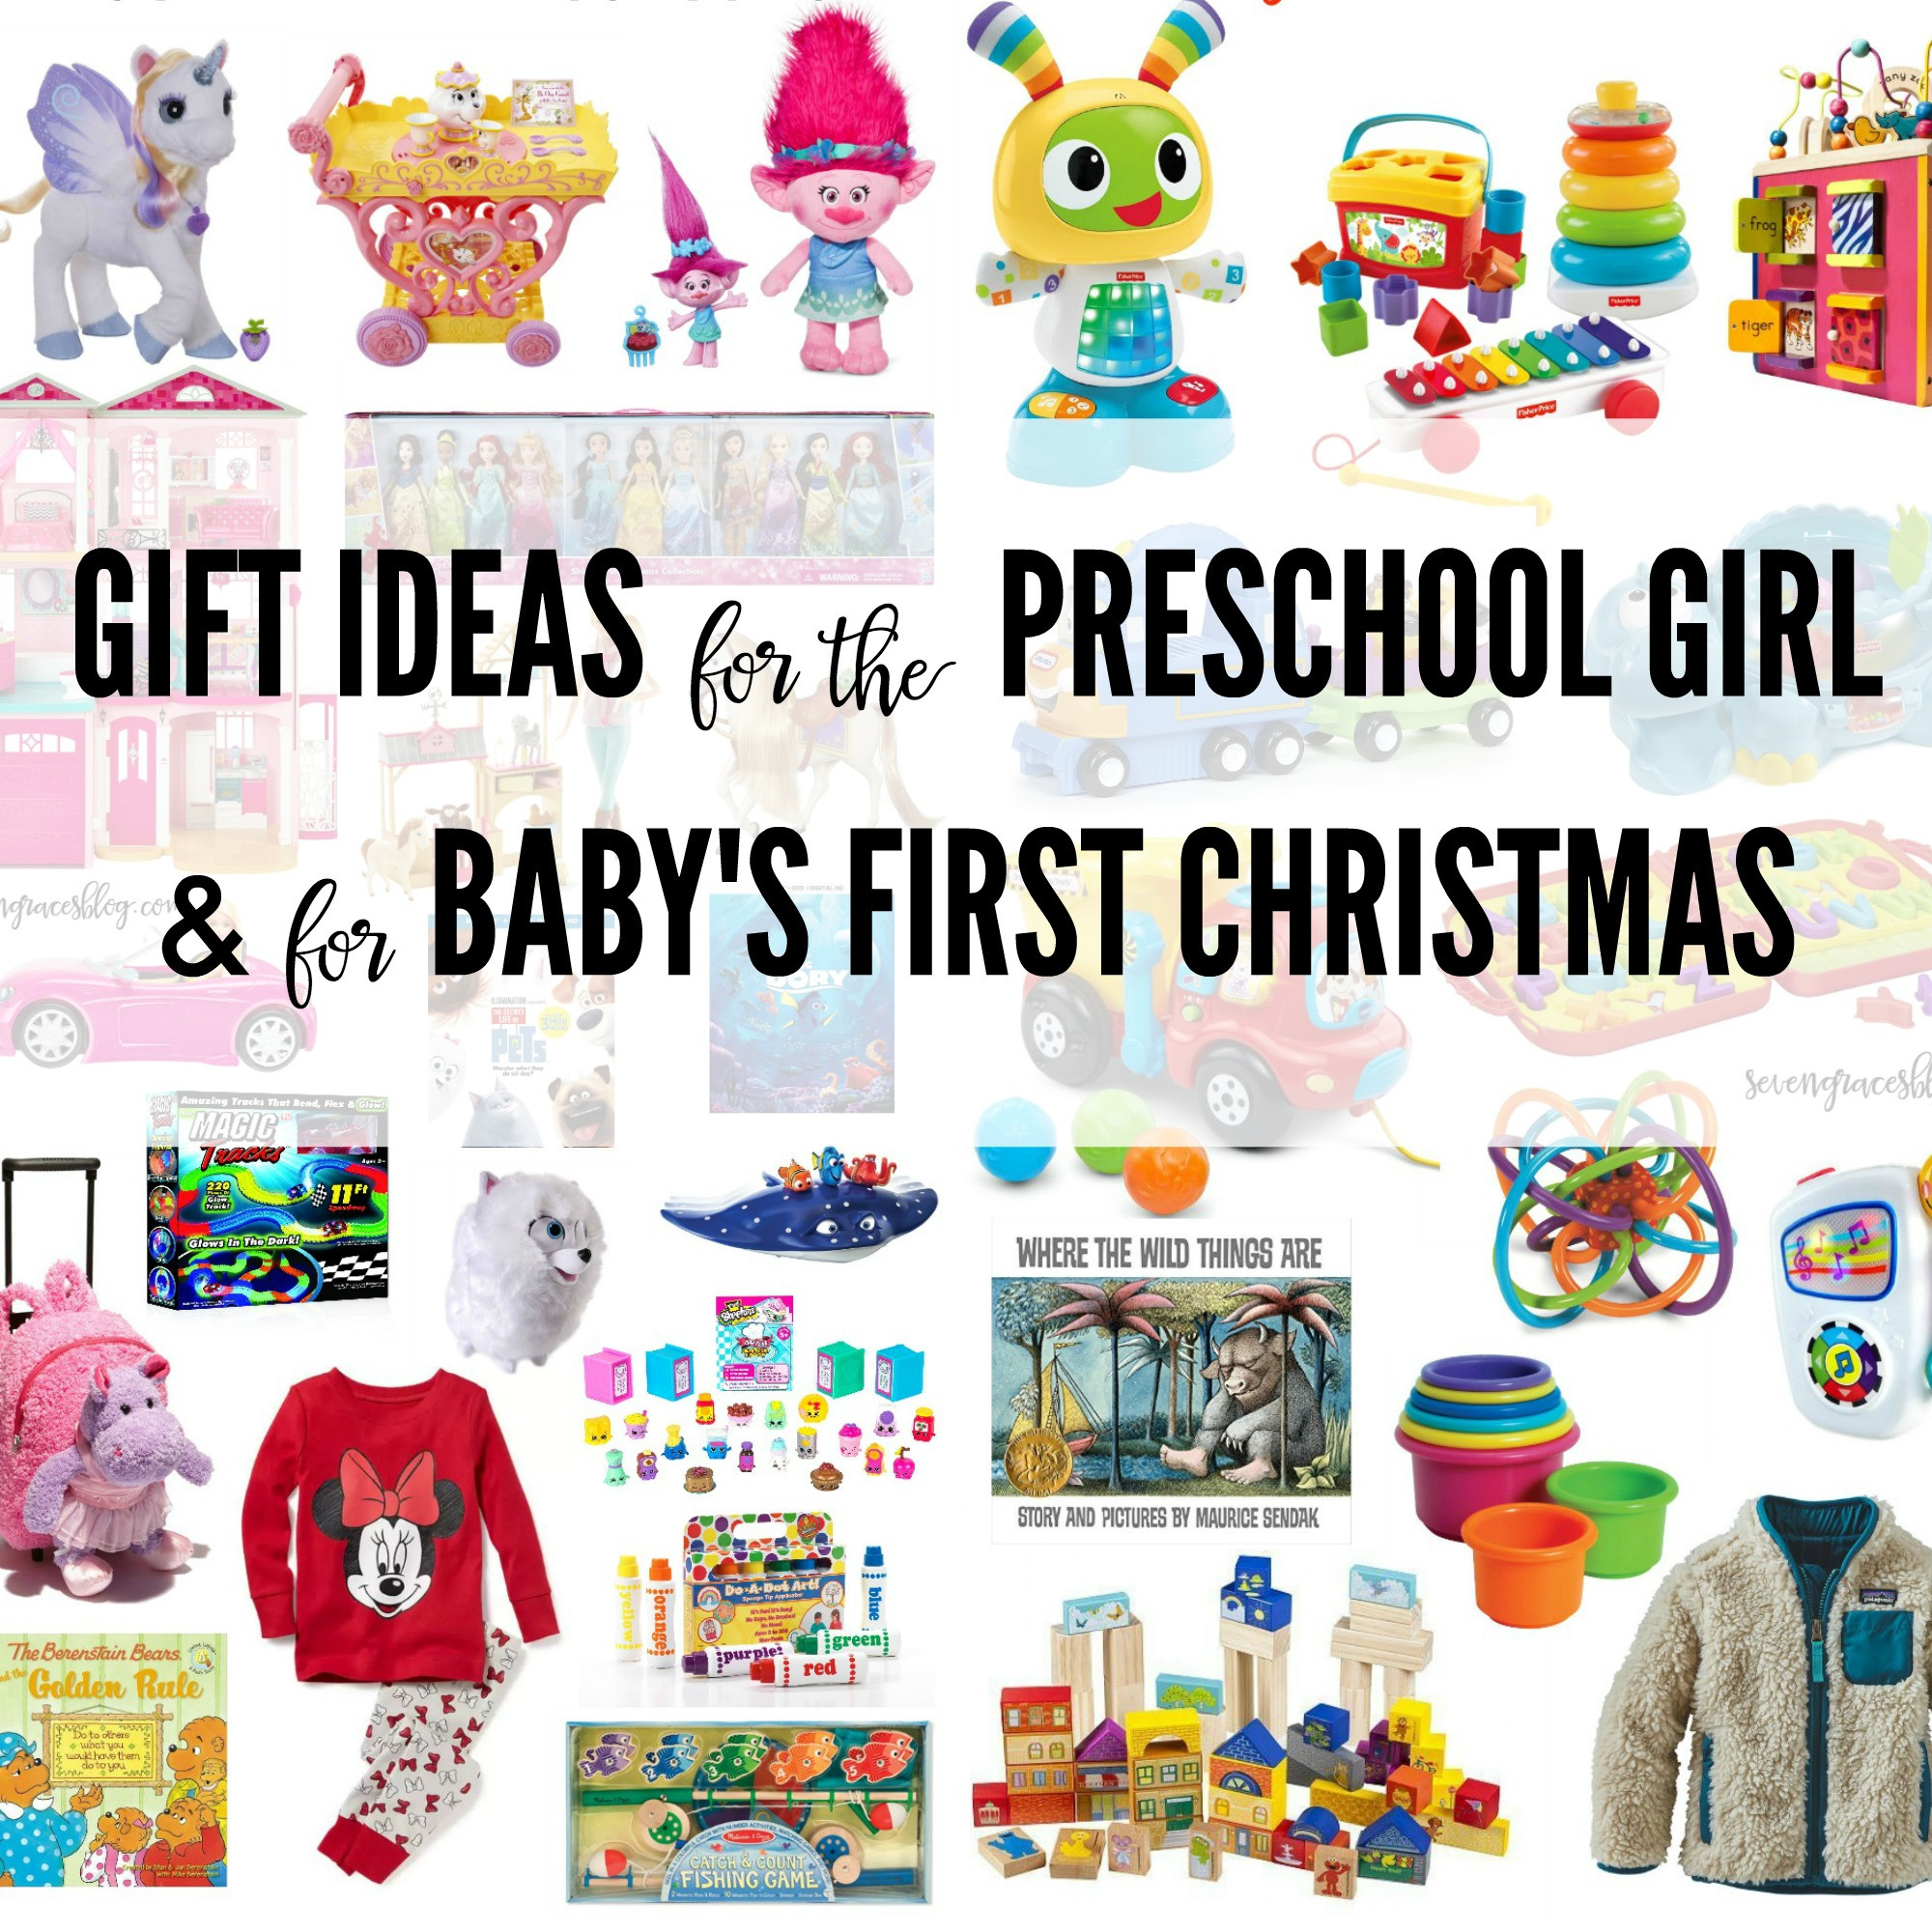 First Christmas Gift Ideas
 Gift Ideas for the Preschool Girl and for Baby s First